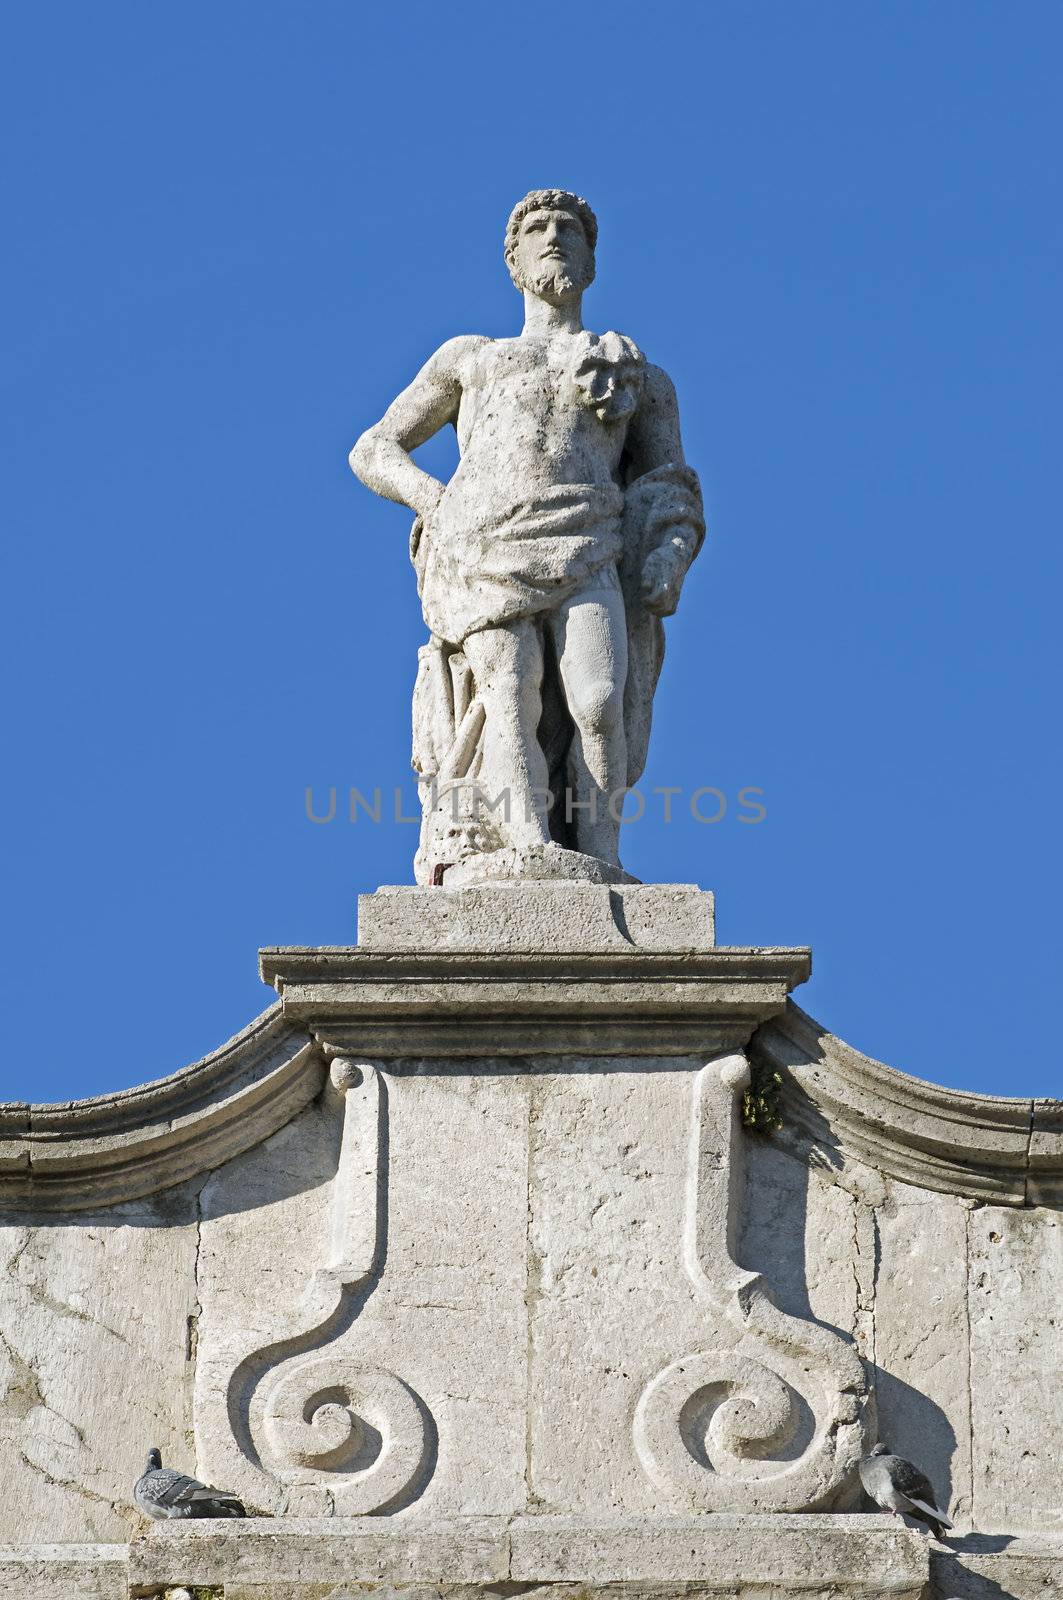 Statue on a building rooftop